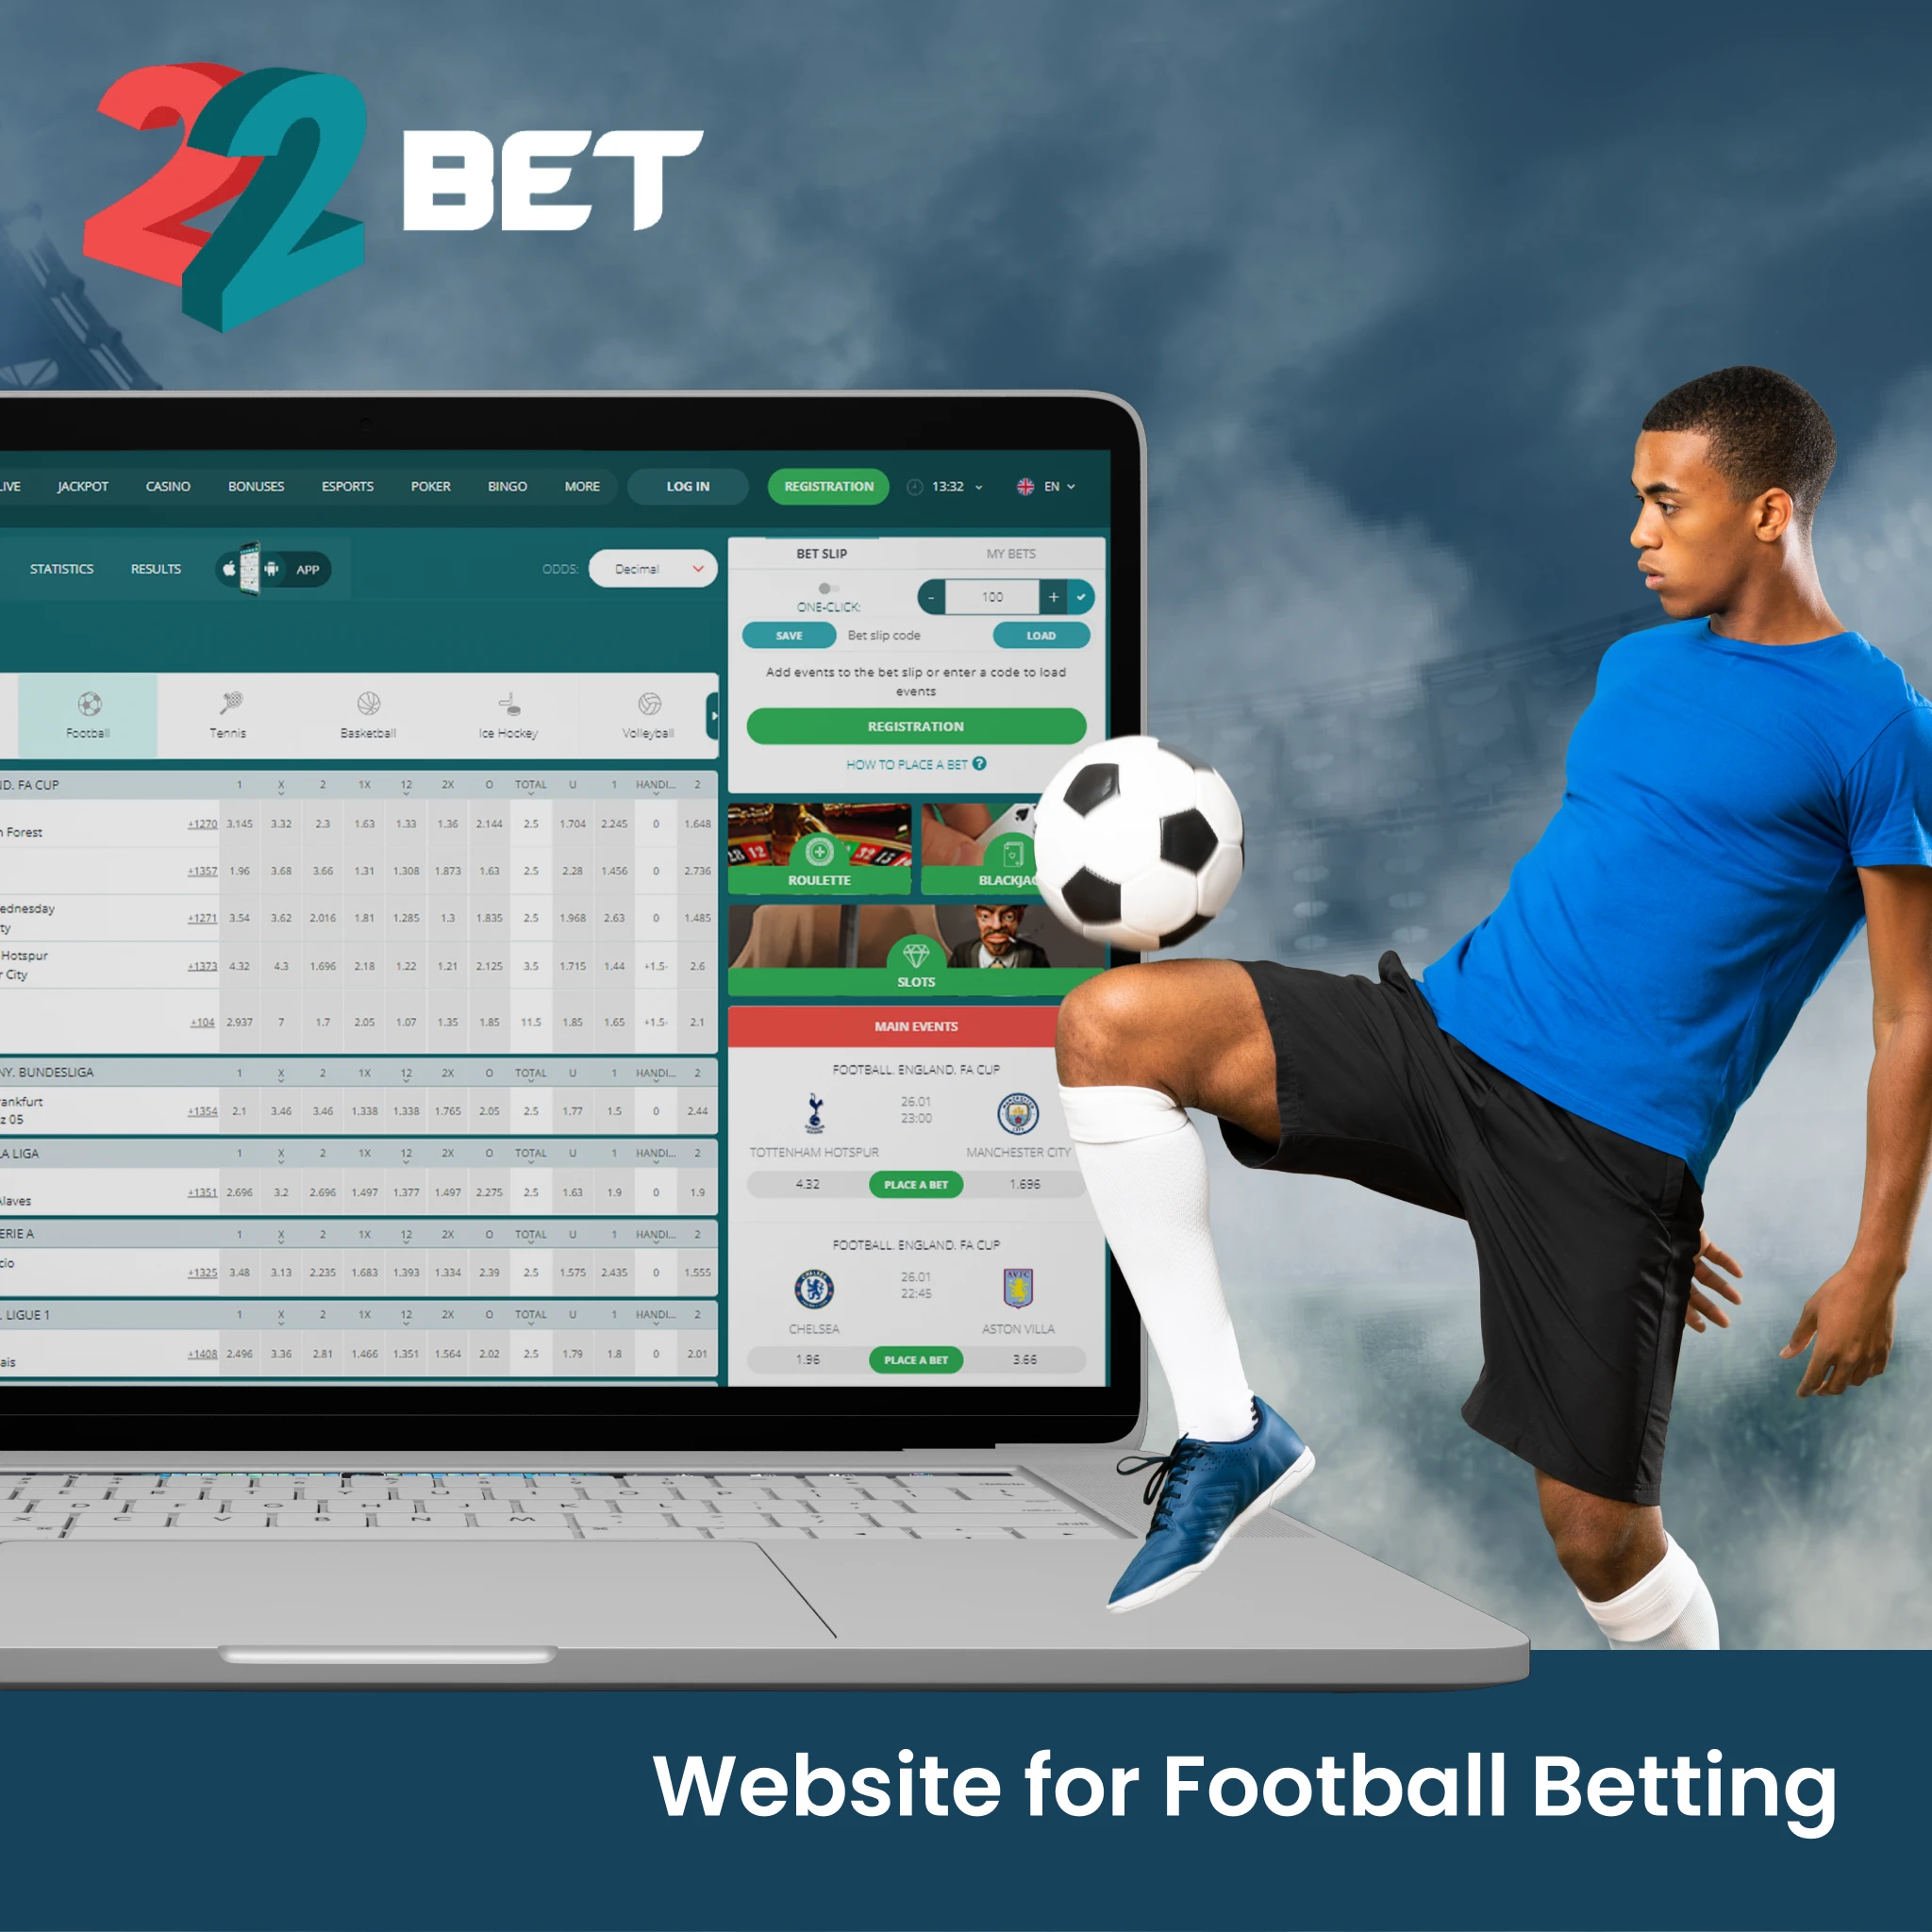 22bet regularly provides bonuses and promotions for football betting.